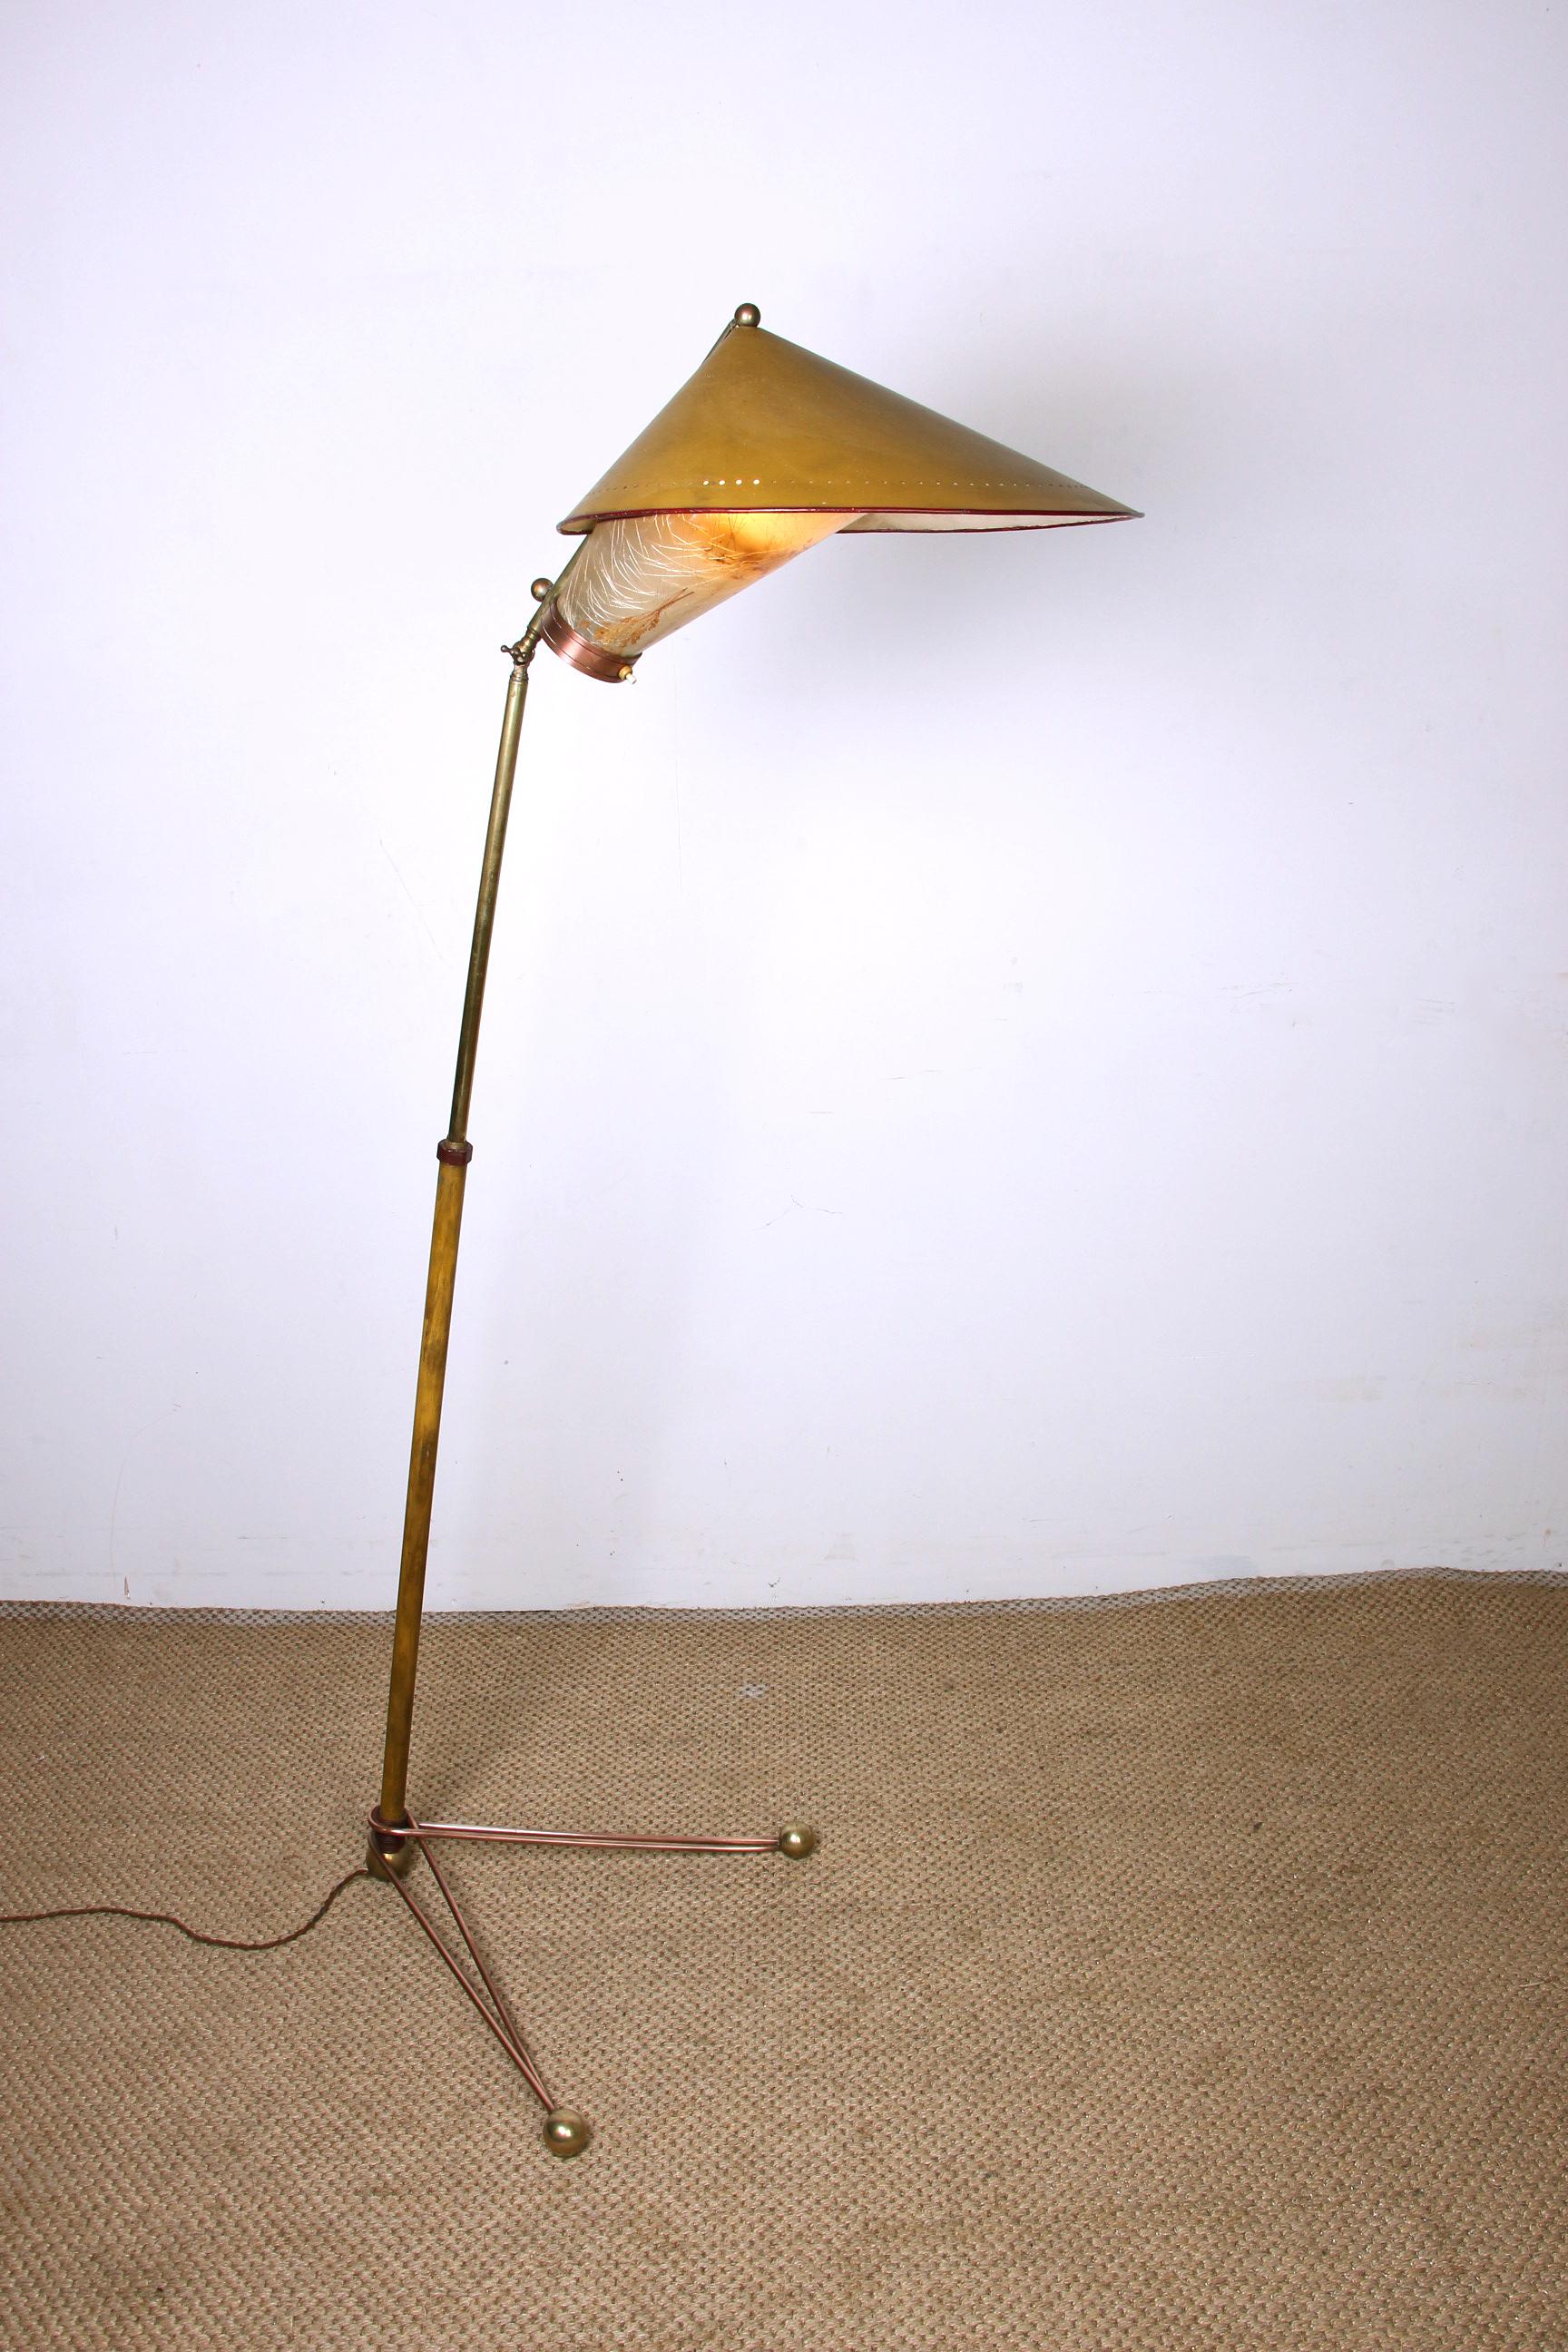 Italian Brass Floor Lamp Was Conical Adjustable in Inclination and Height Stilno 14